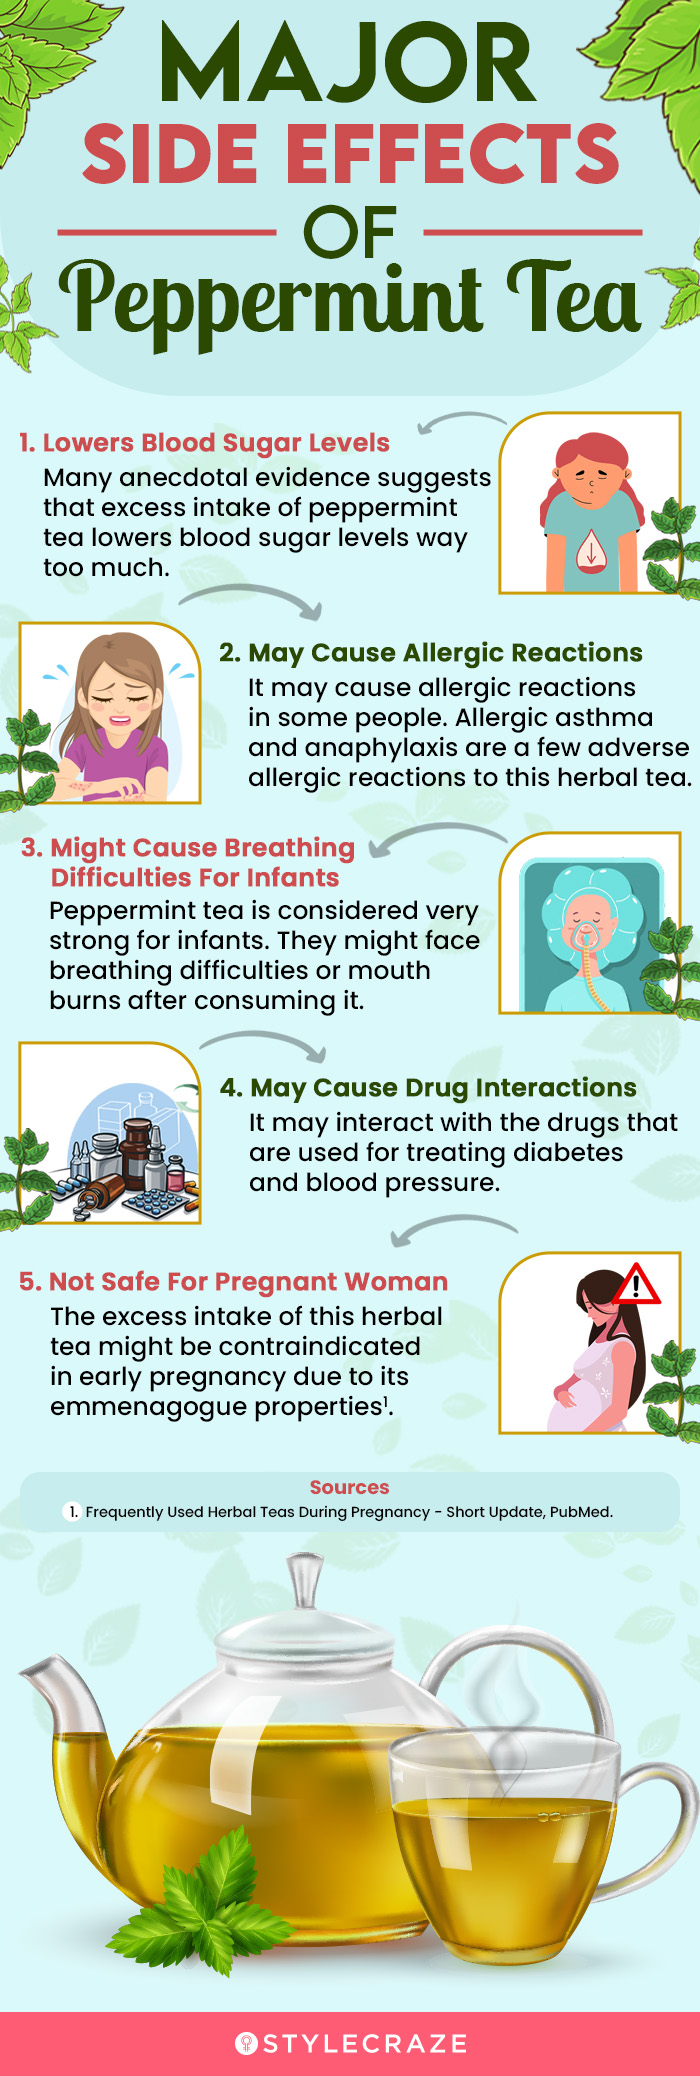 major side effects of peppermint tea [infographic]